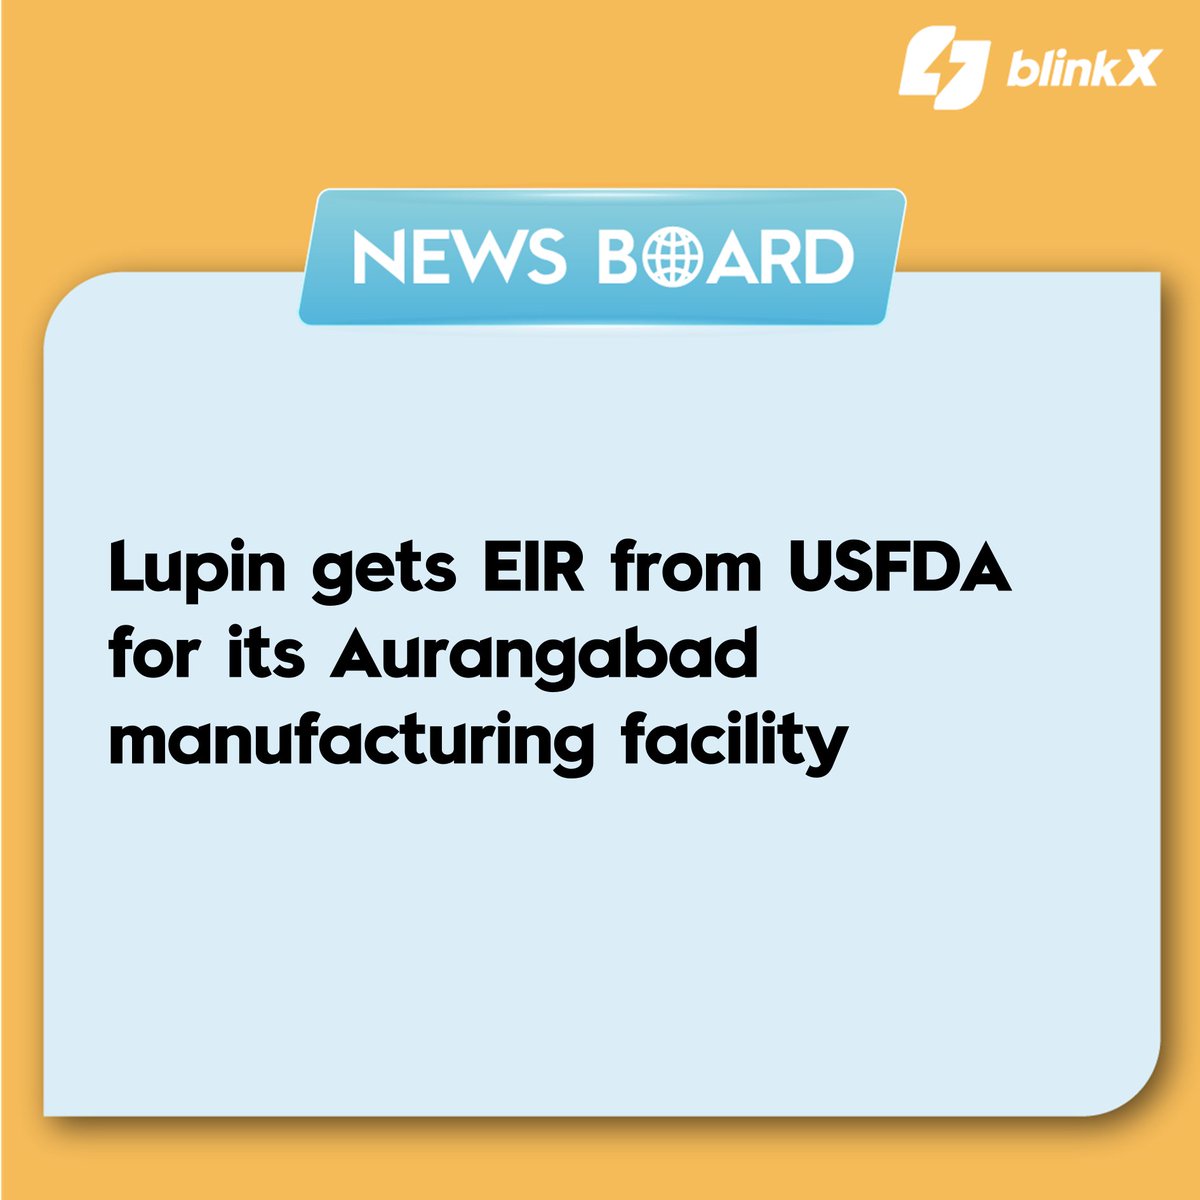 The U.S. FDA has determined that the inspection classification of the facility is Voluntary Action Indicated (VAI), Lupin said.

#Lupin #USFDA #inspection #pharma #health #healthcare #rupee #news #marketupdates #marketupdates #stockinfocus #StocksToBuy #federal #bseindia…